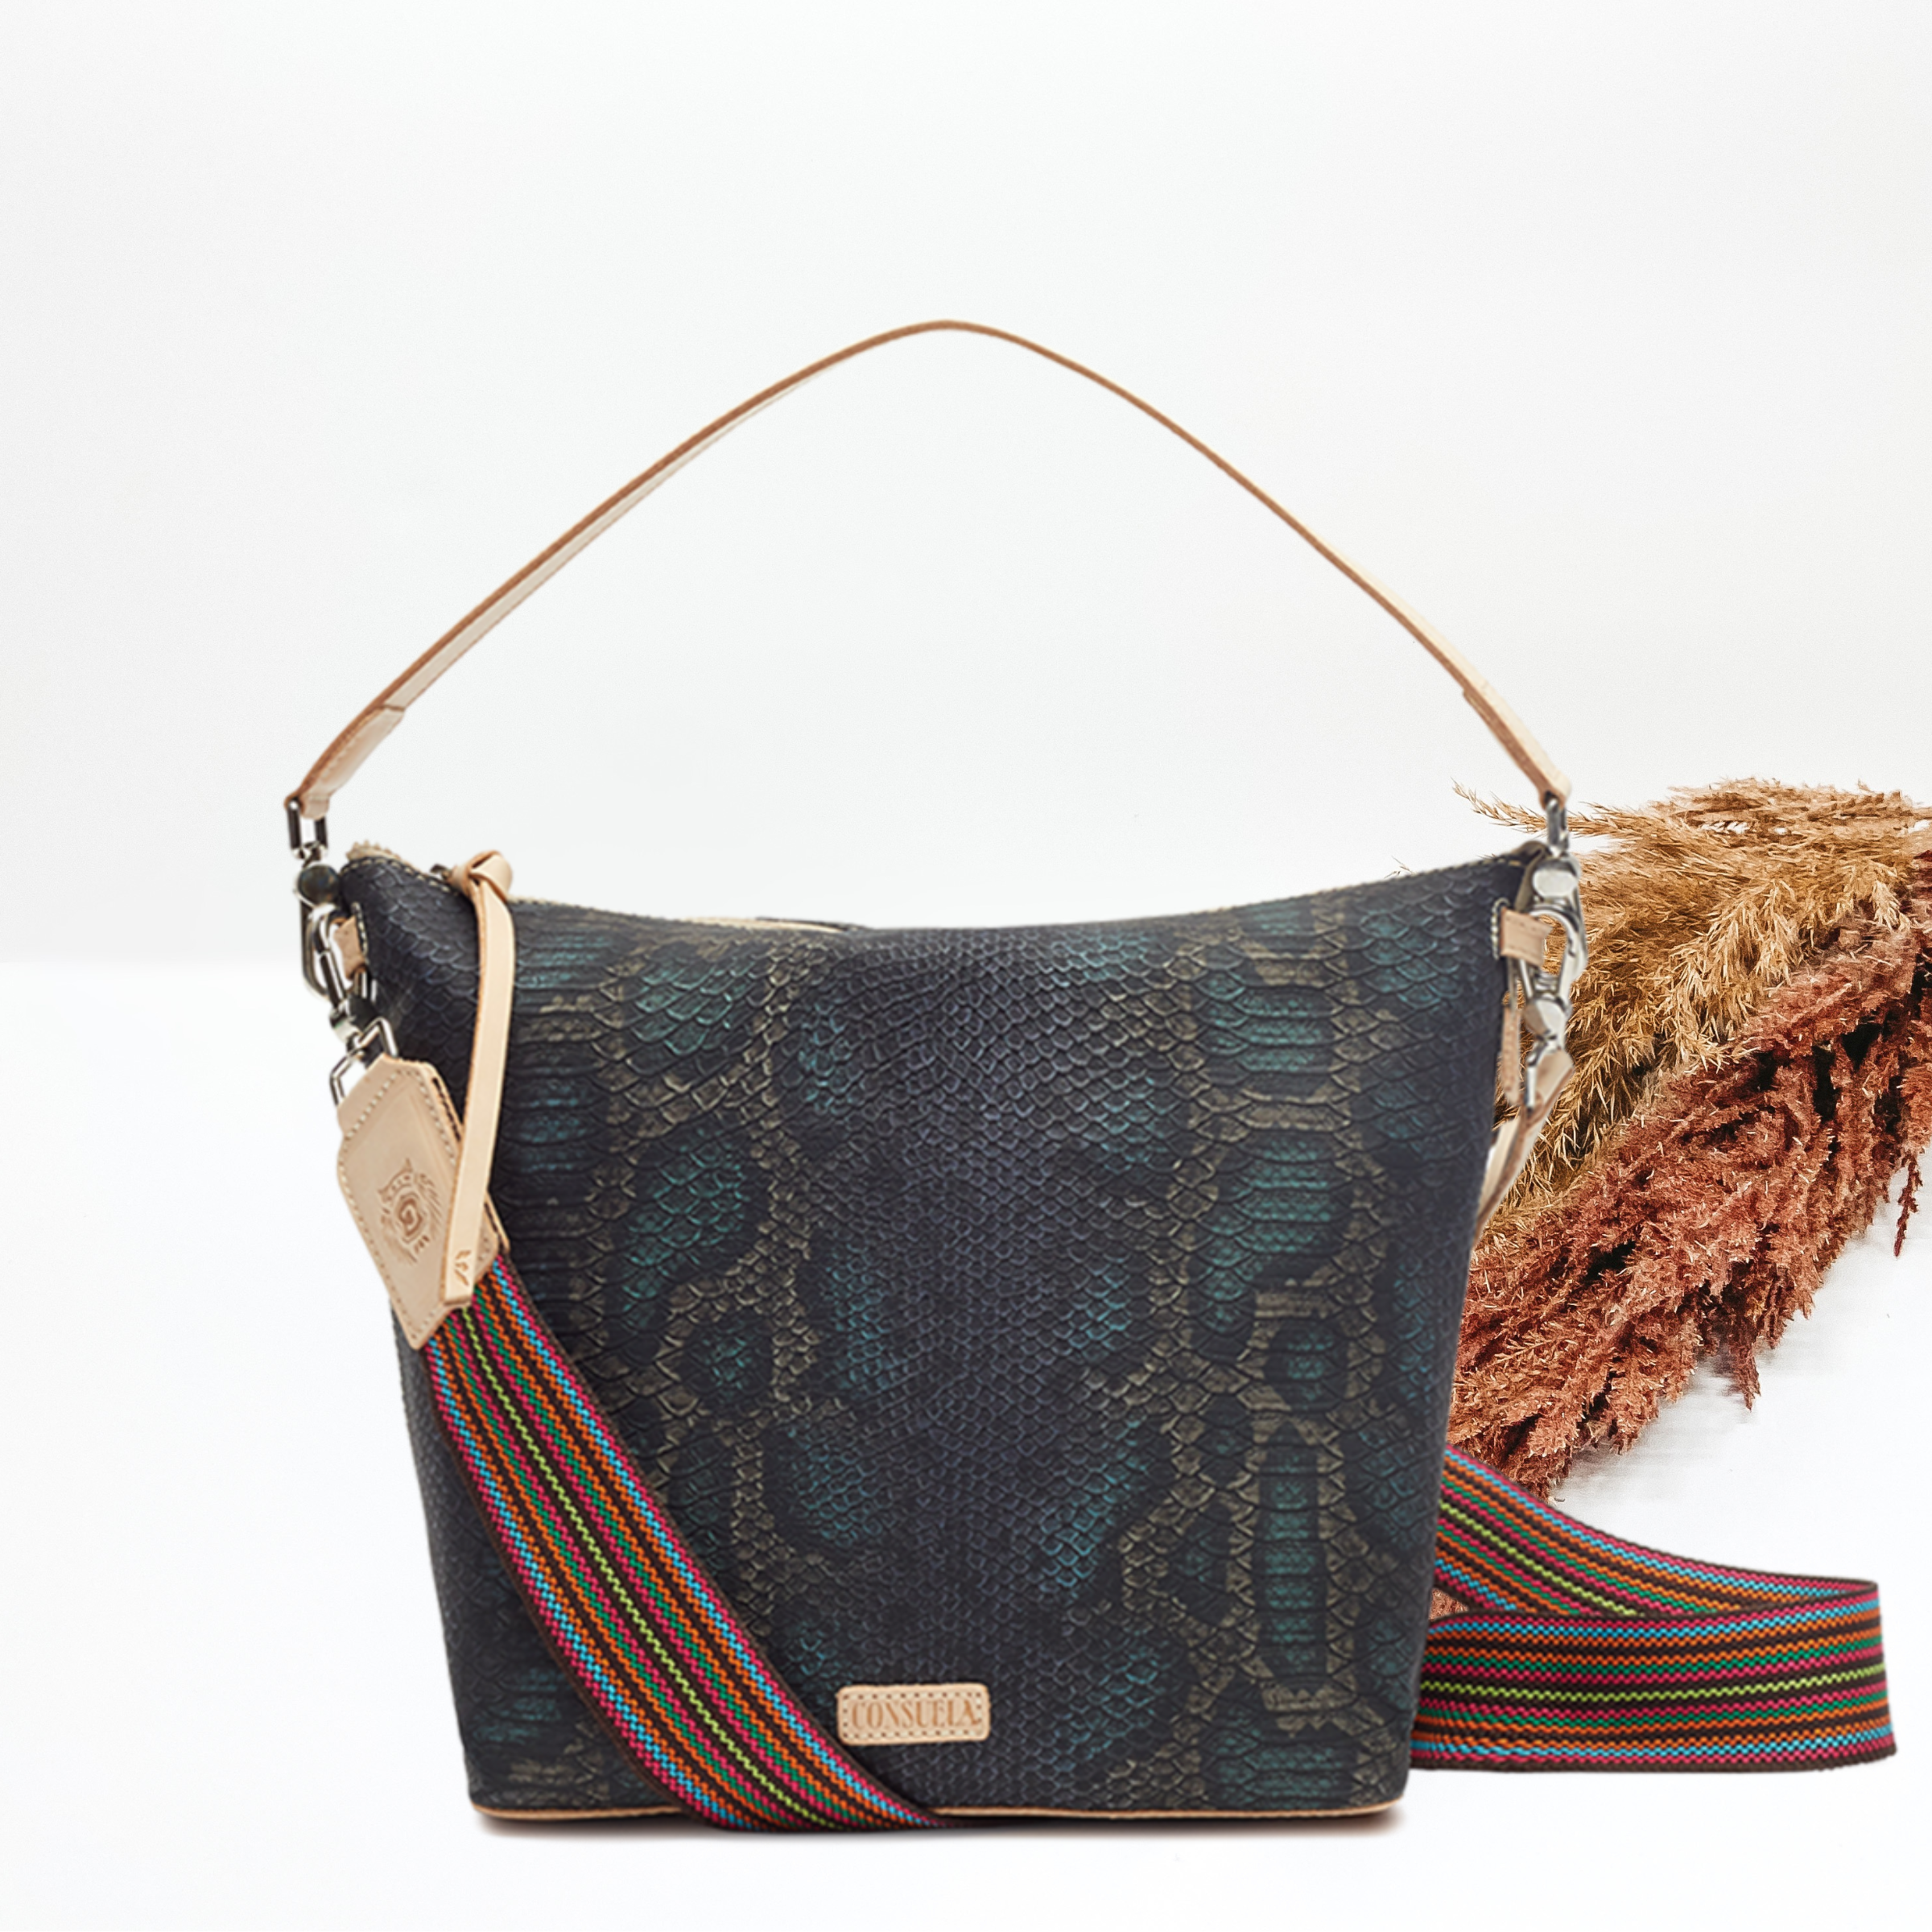 This bag has a smaller base with a wider top. This a dark blue and black snake print bag. This bag also has a striped handle and a wide tan leather strap. This bag is pictured on a white background with tan and brown pompous grass in the background.